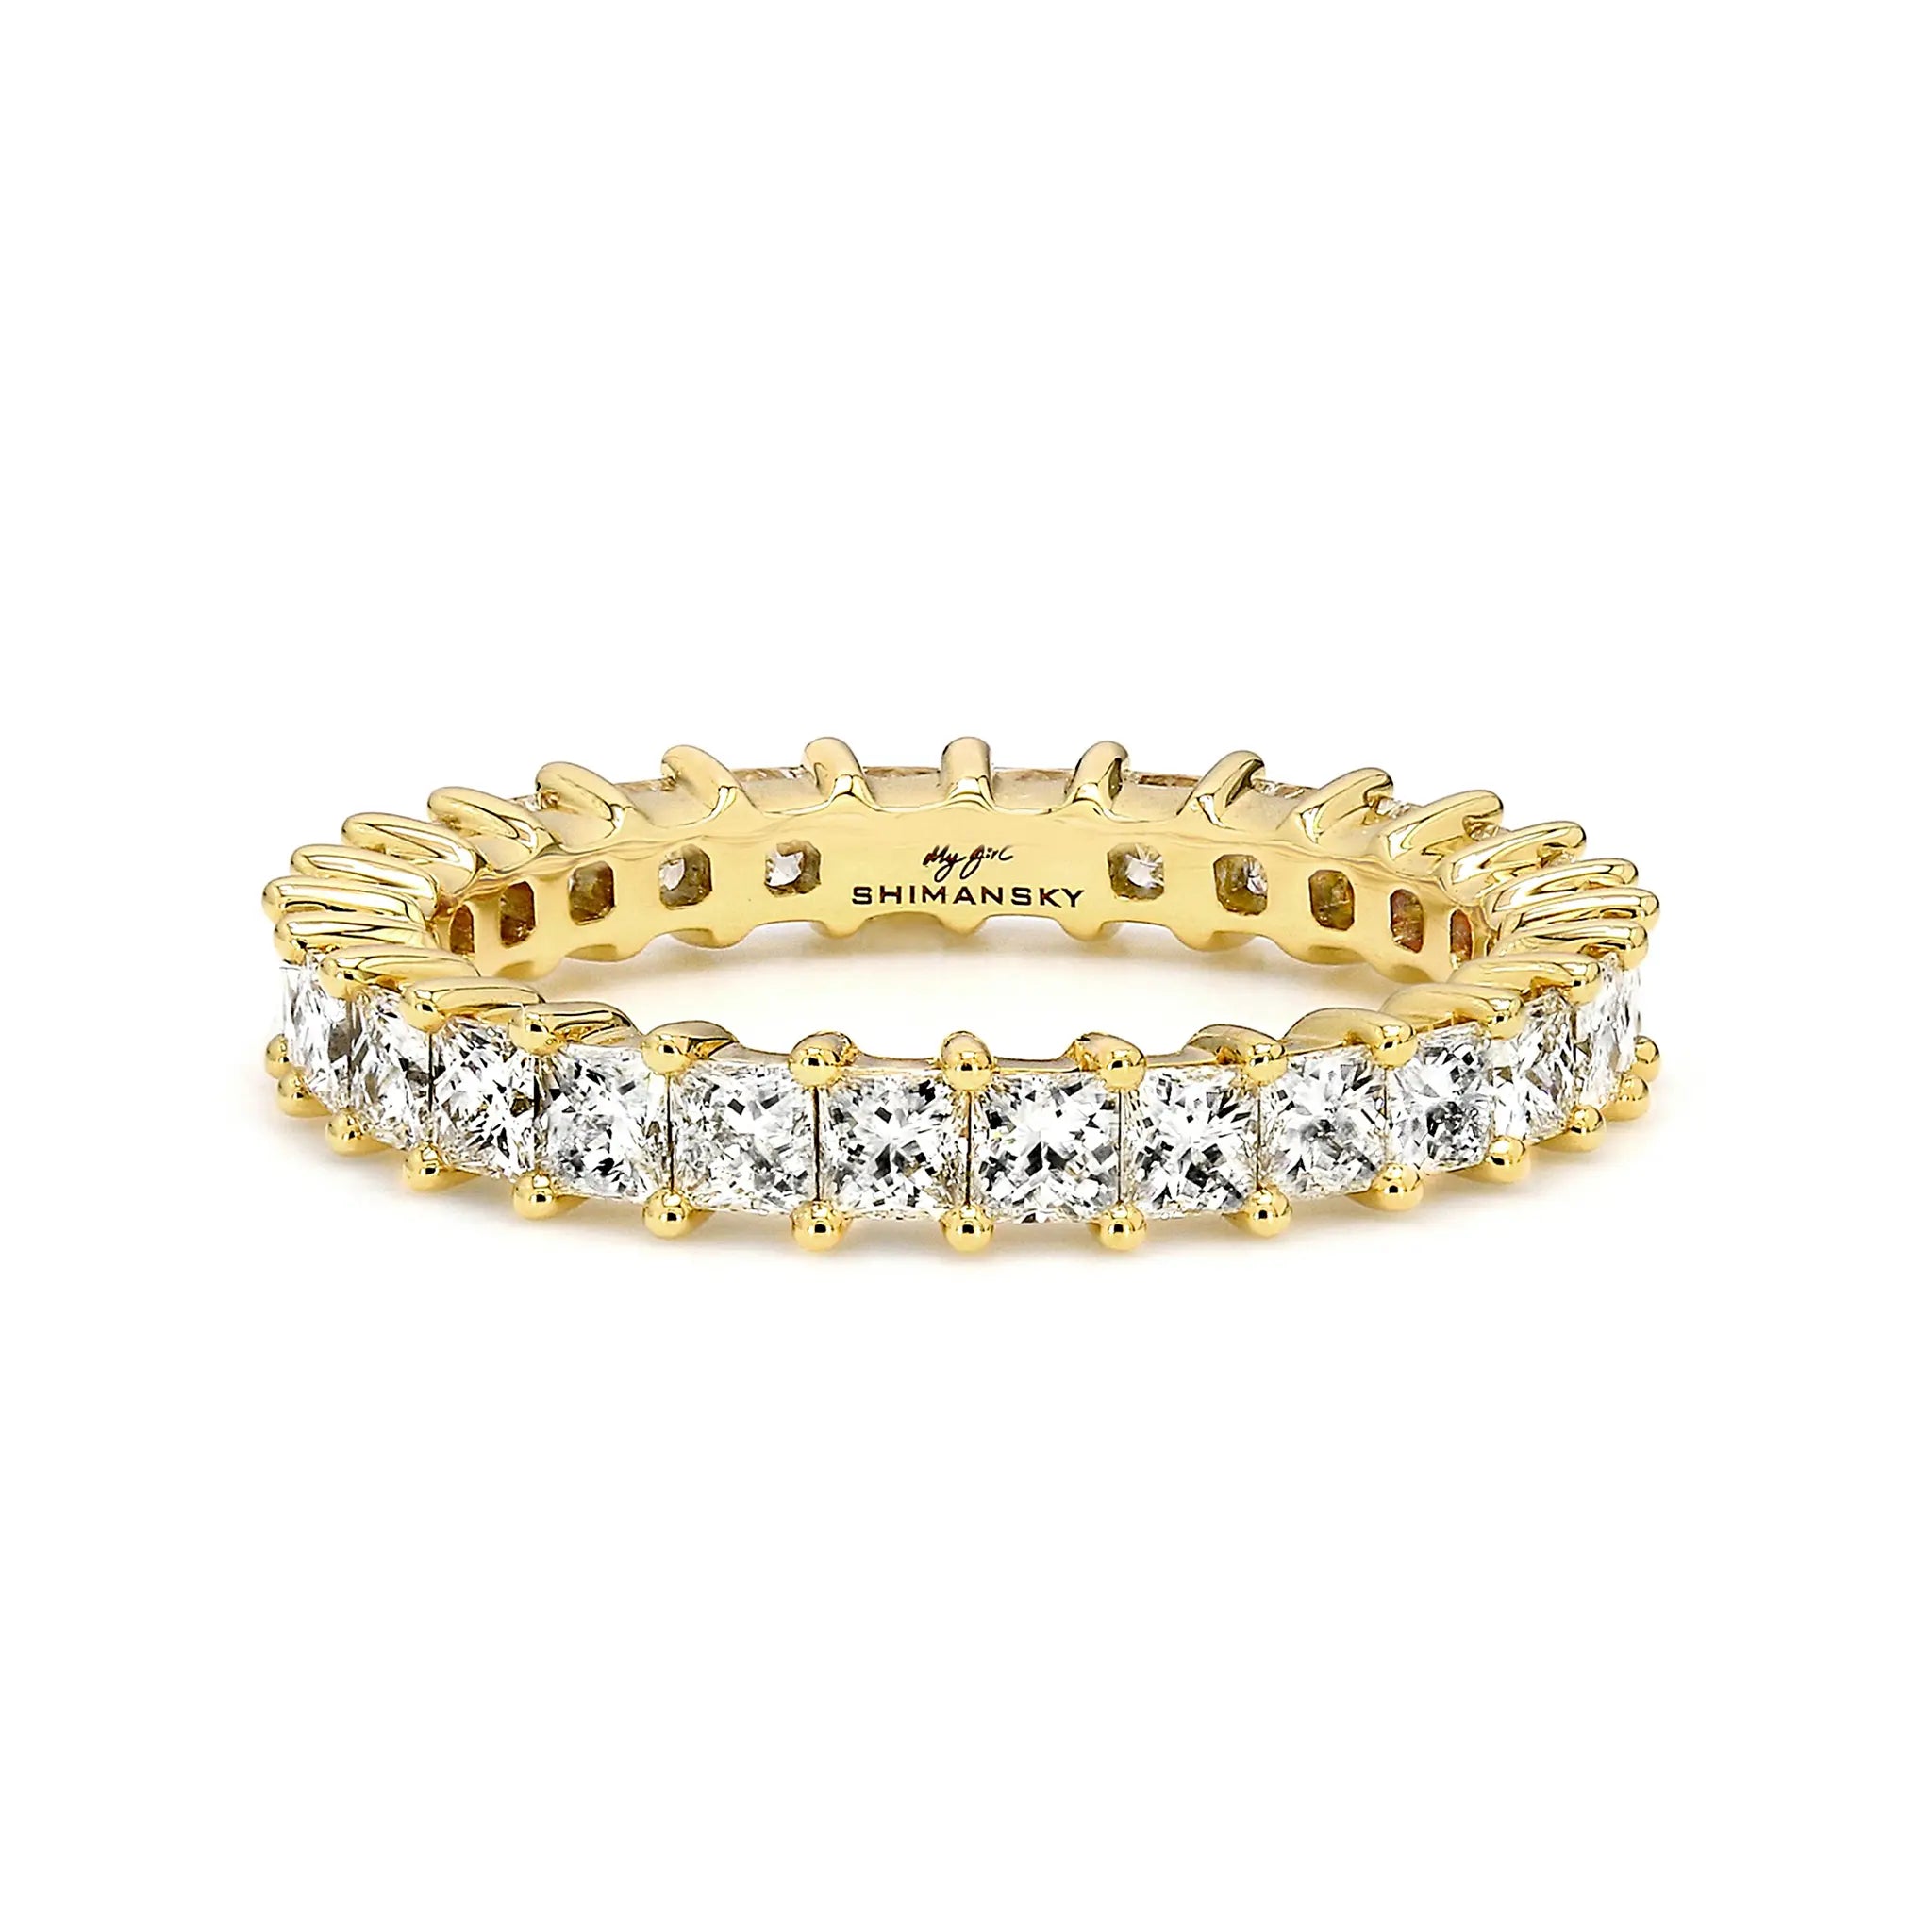 Shimansky - My Girl Claw set Full Eternity Diamond Ring 2.00ct Crafted in 18K Yellow Gold